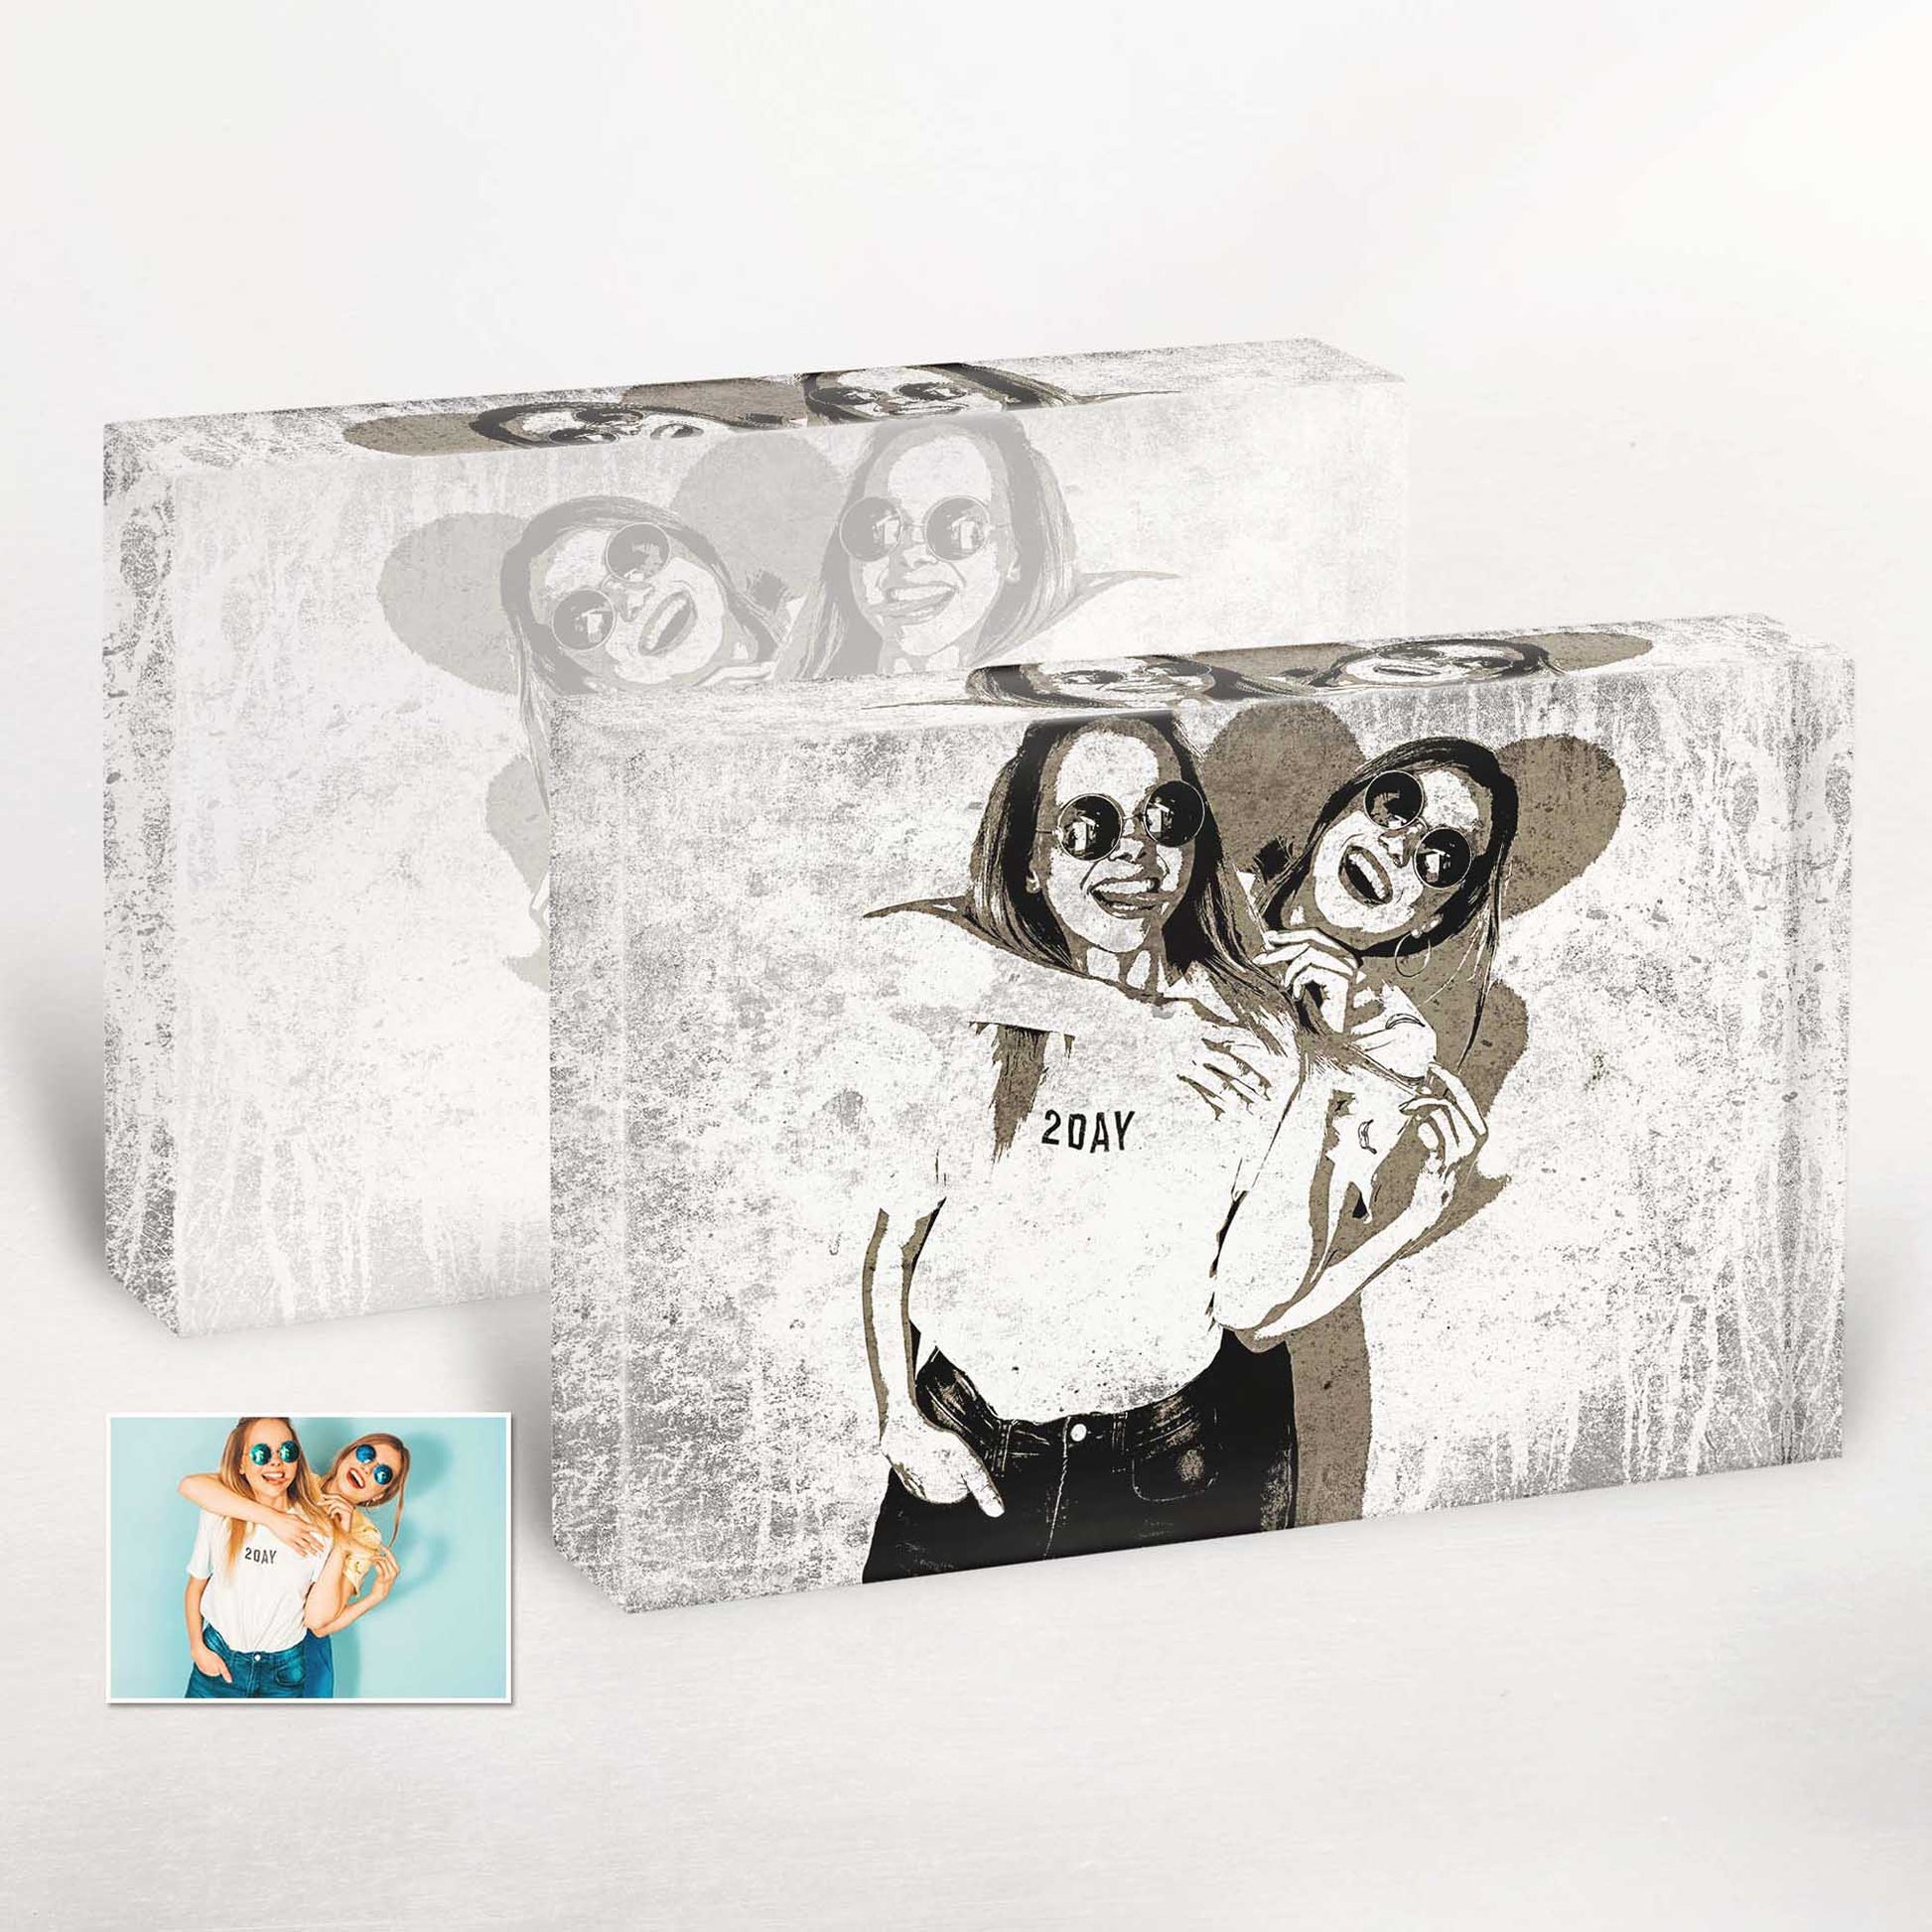 Cool and Chic: Personalised Black and White Street Art Acrylic Block Photo. Add a touch of urban elegance to your home decor with our minimalist street art pieces. Each acrylic block photo is customised for a truly unique 